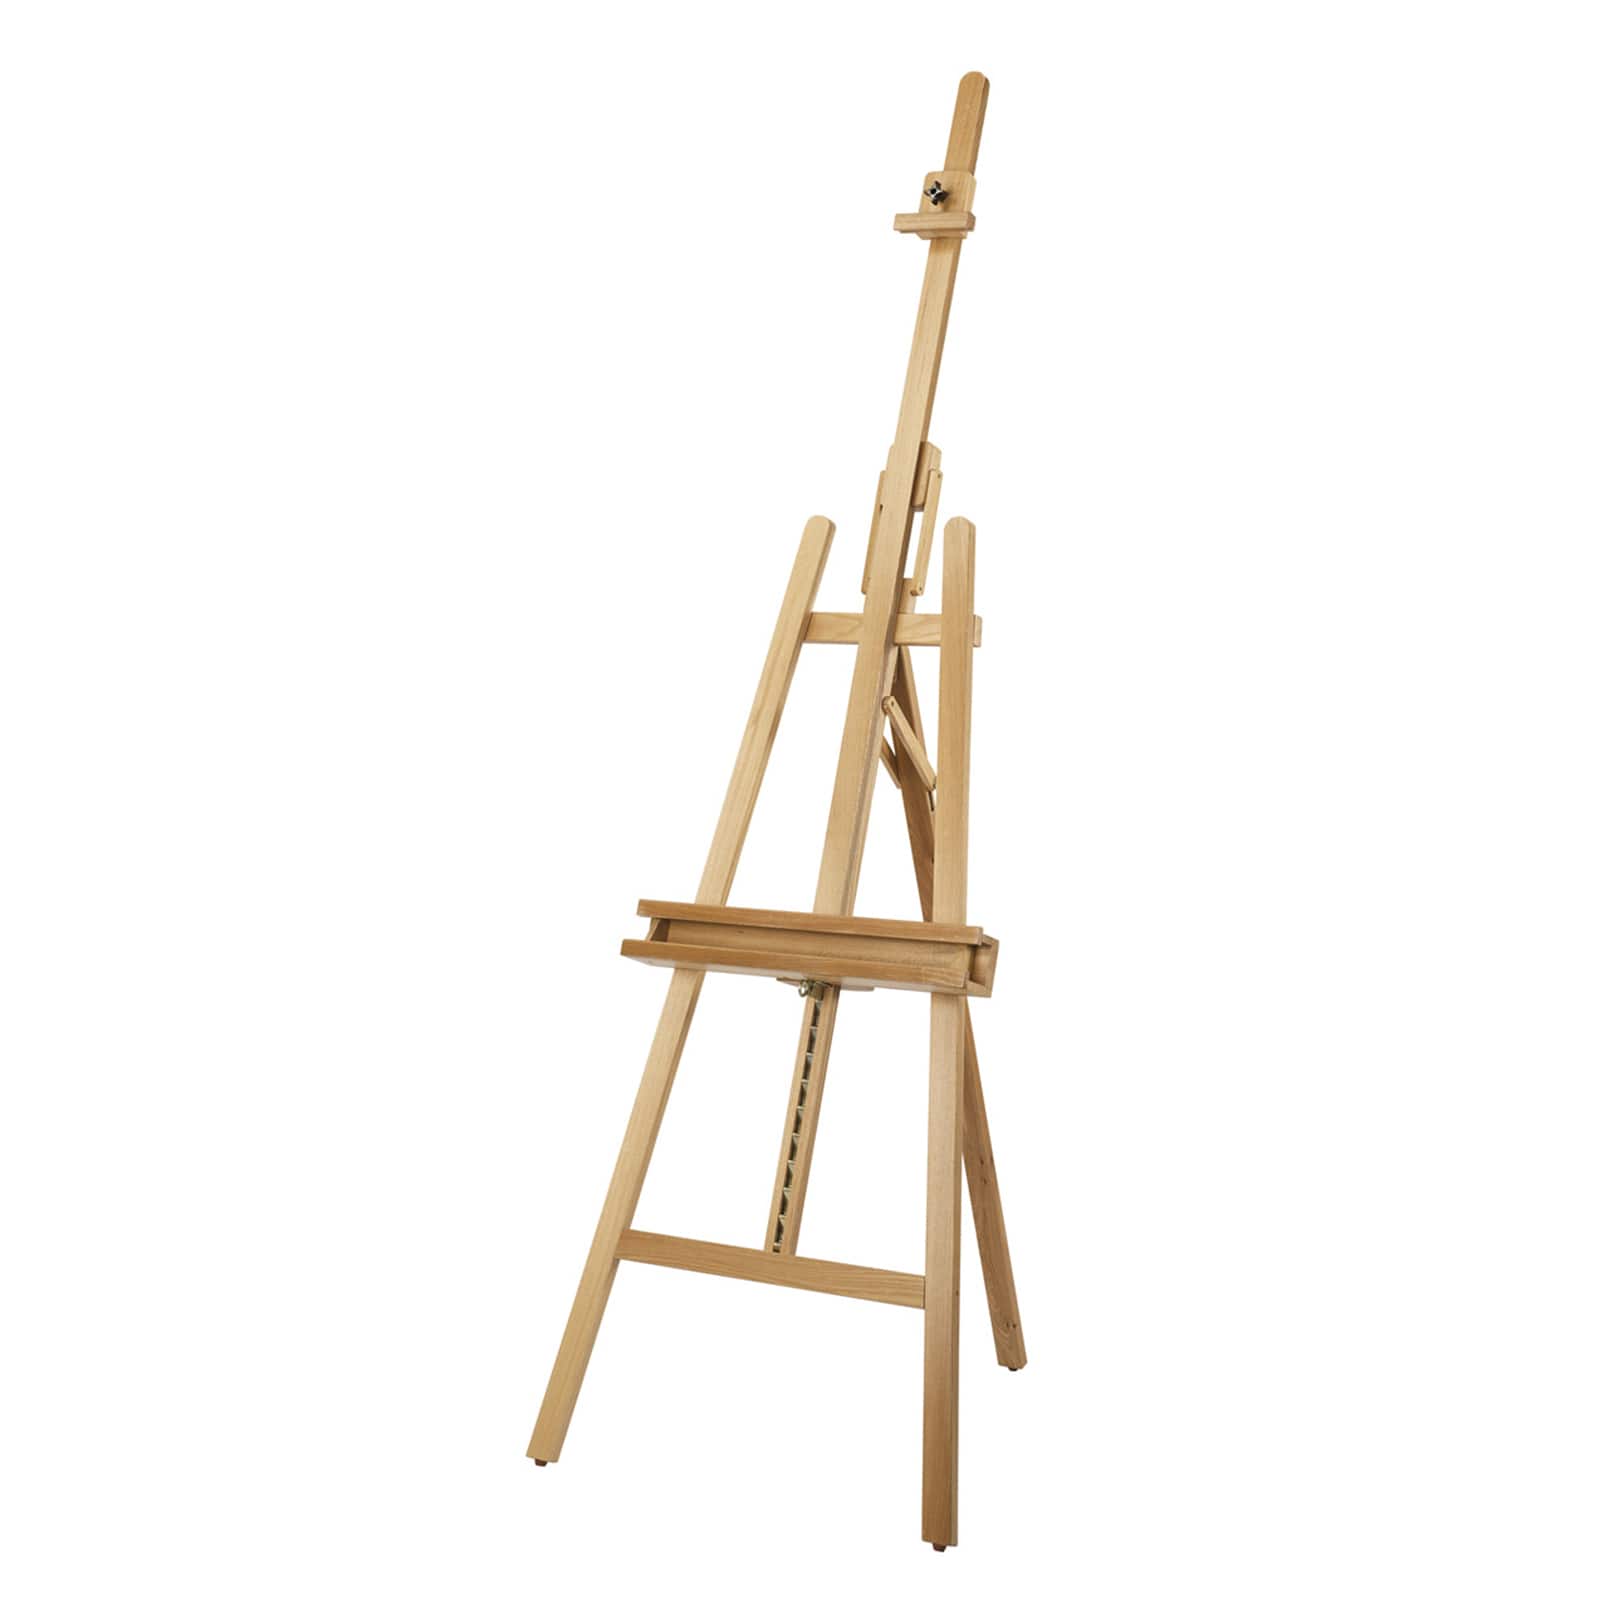  Large Easels For Painting Canvas 26 Pcs Easel And